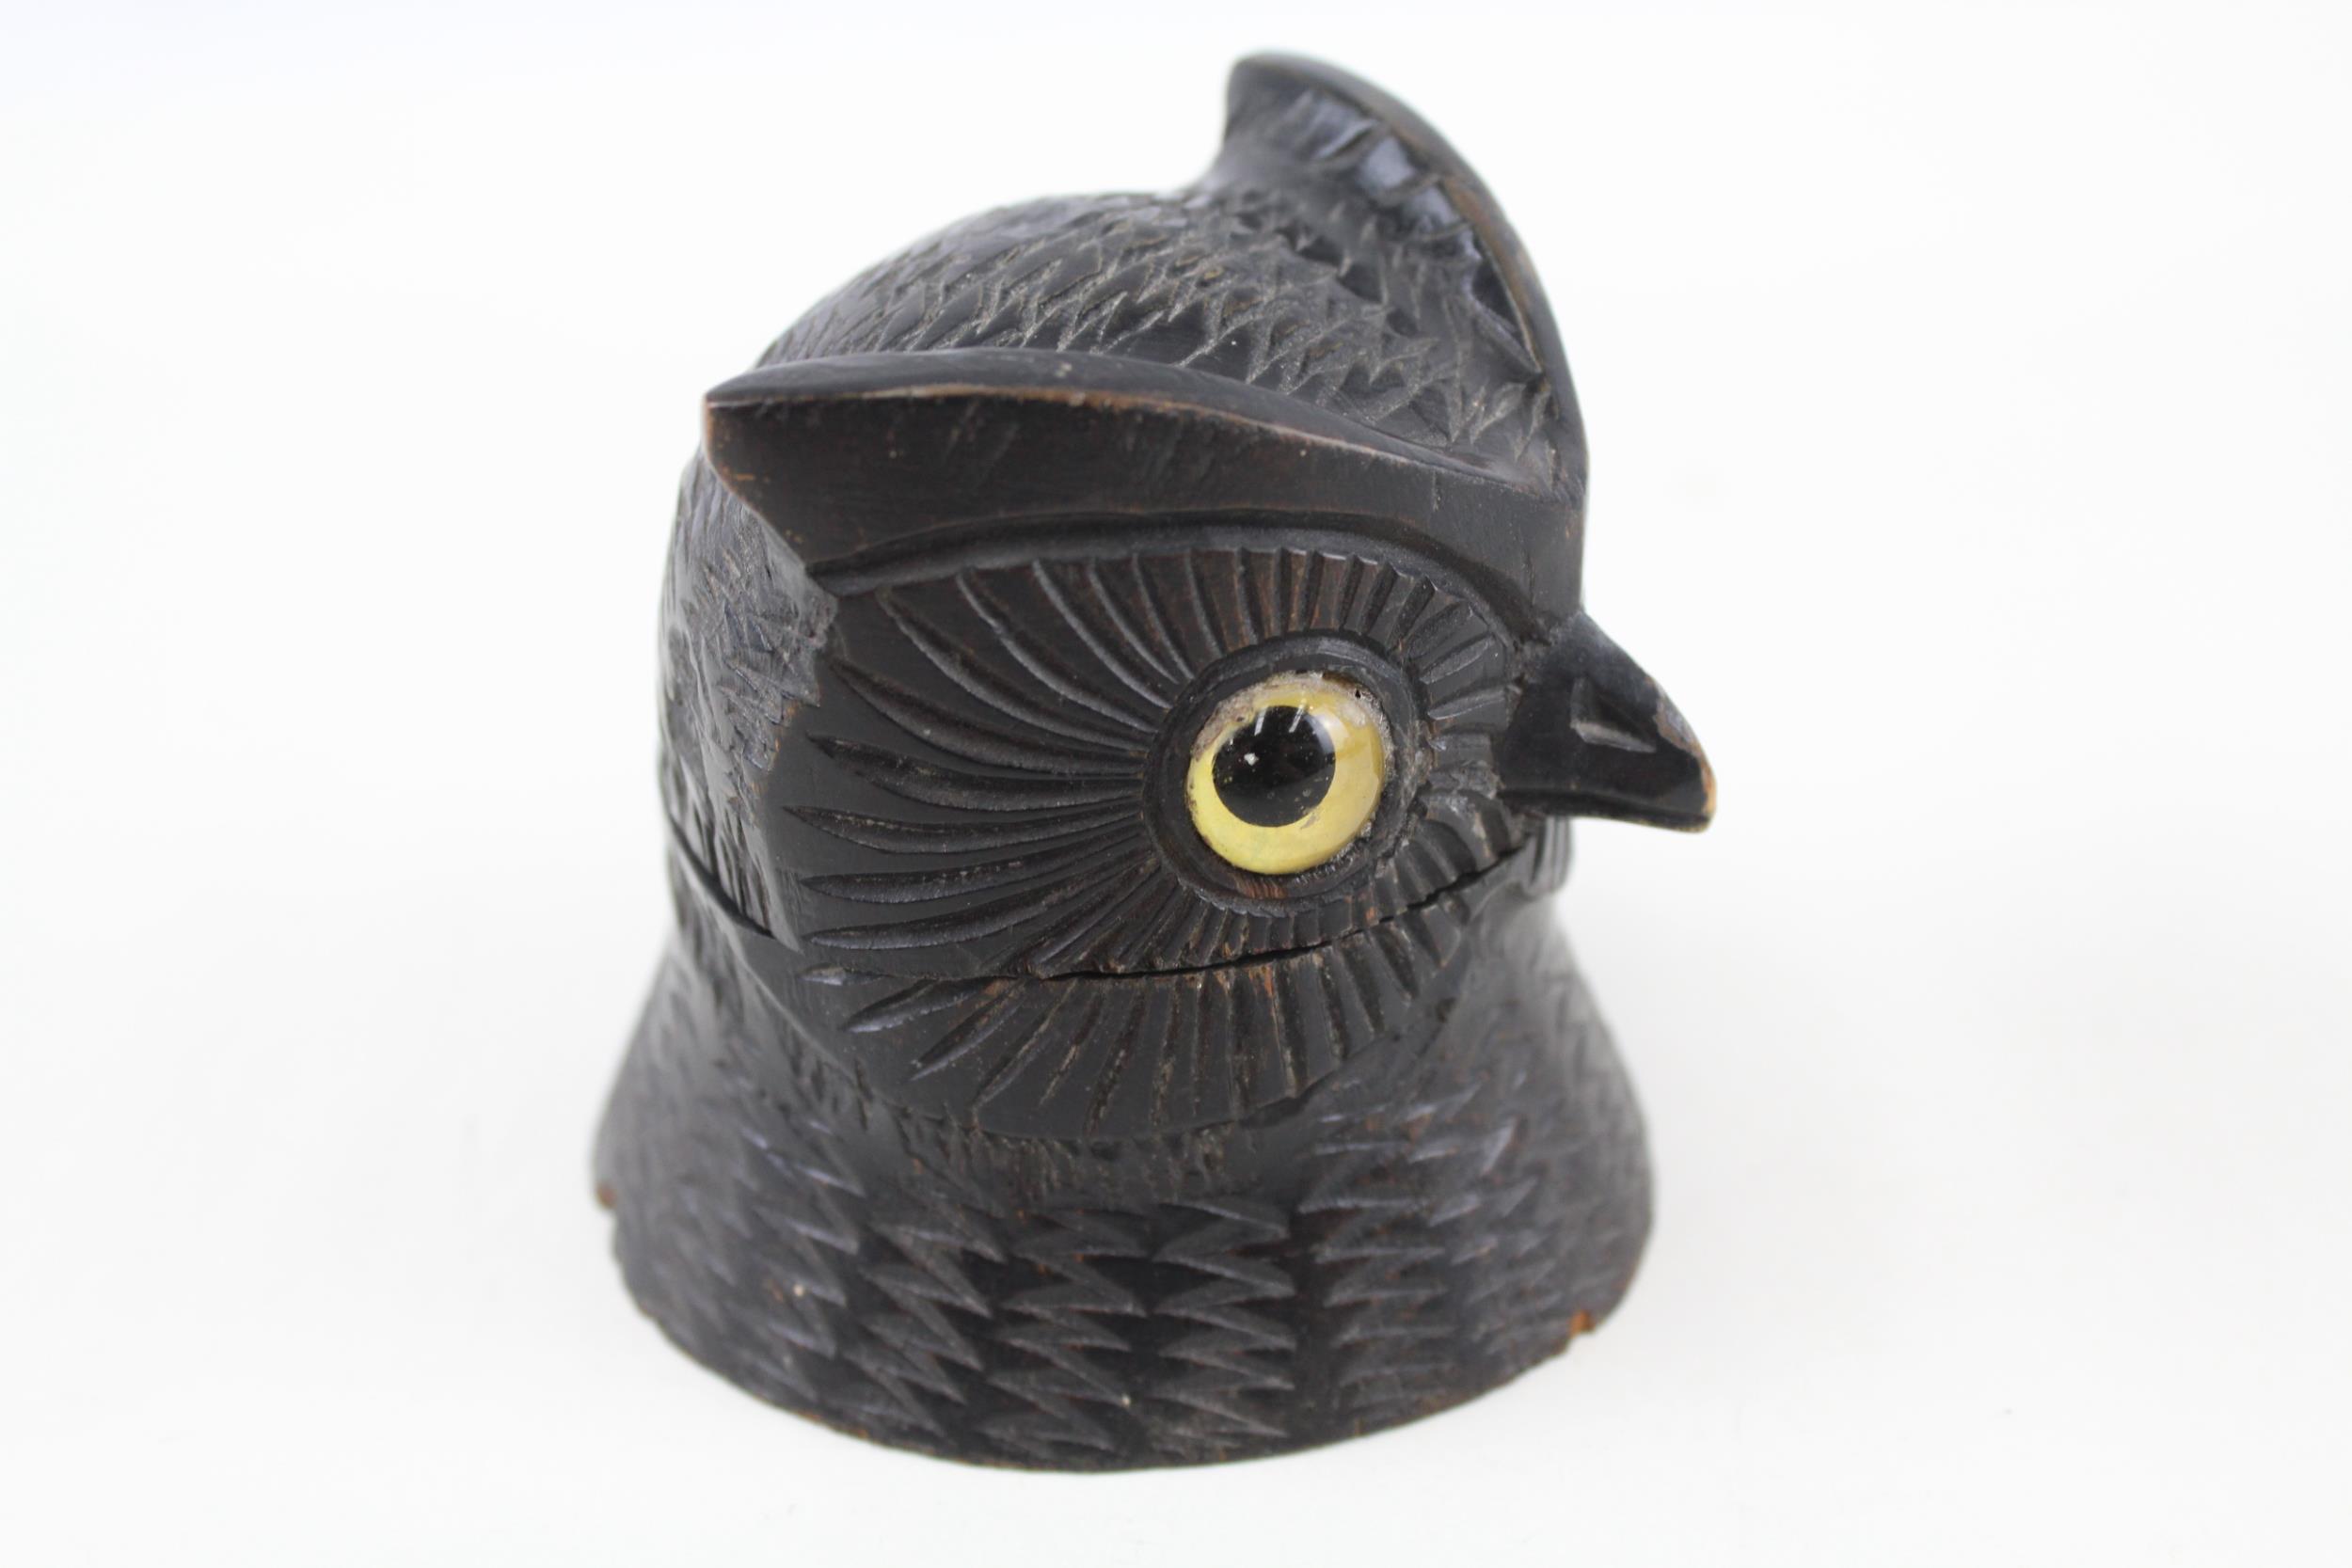 Antique 19th Century Black Forest Carved Wood Owl Head Inkwell - Height - 7.8cm In antique condition - Image 2 of 5